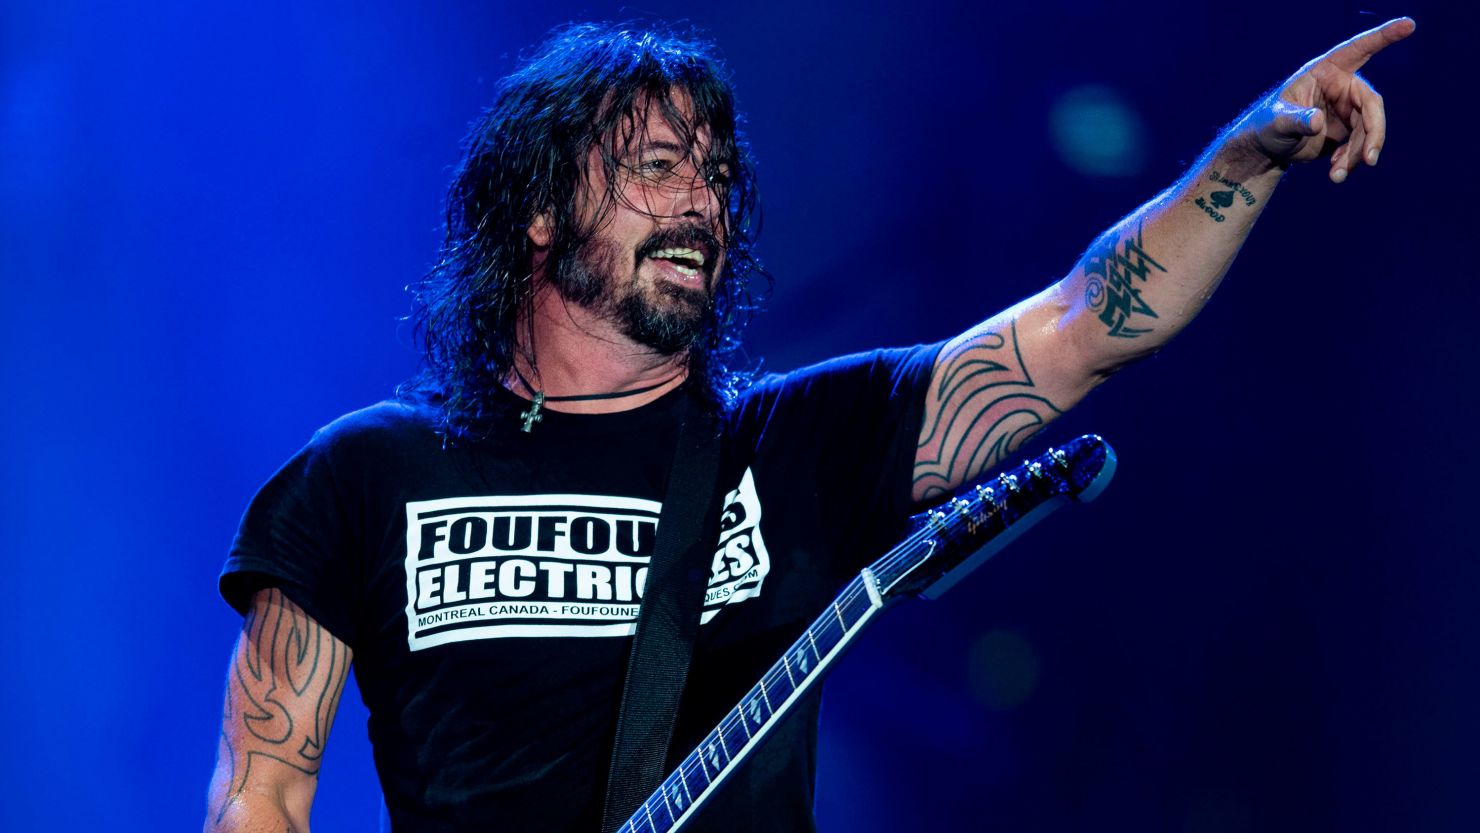 US singer and guitarist Dave Grohl of the Foo Fighters performs onstage during the Rock in Rio festival at the Olympic Park, Rio de Janeiro, Brazil, on September 28, 2019.